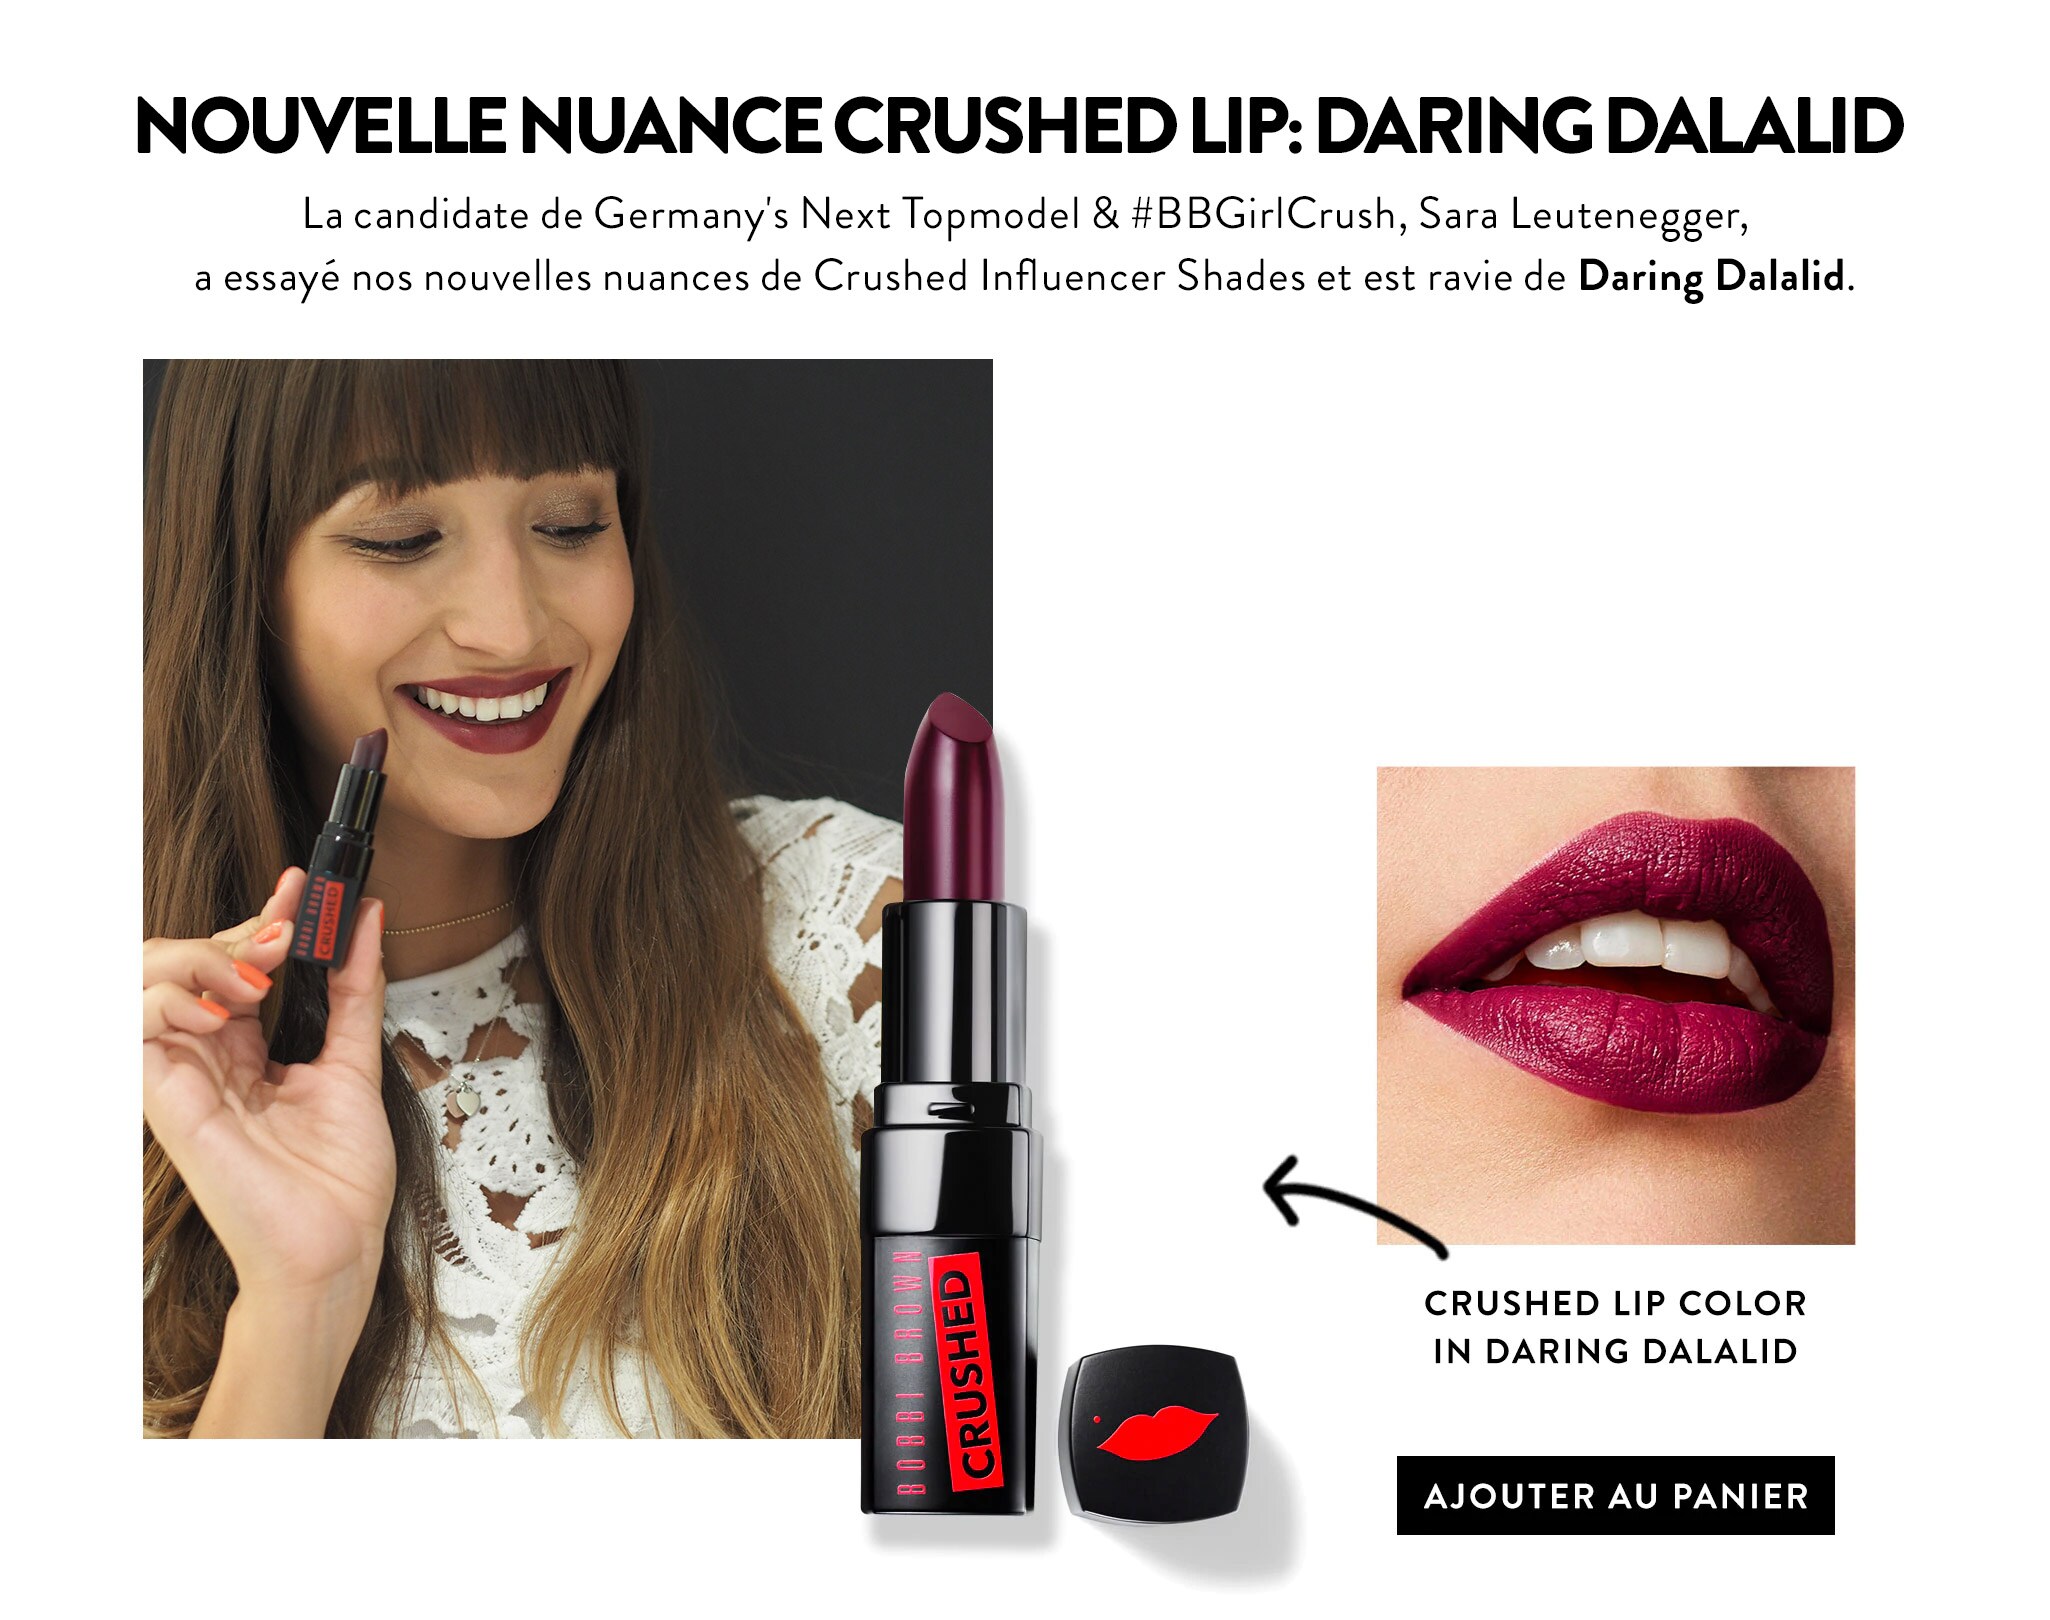 Crushed Lip Color